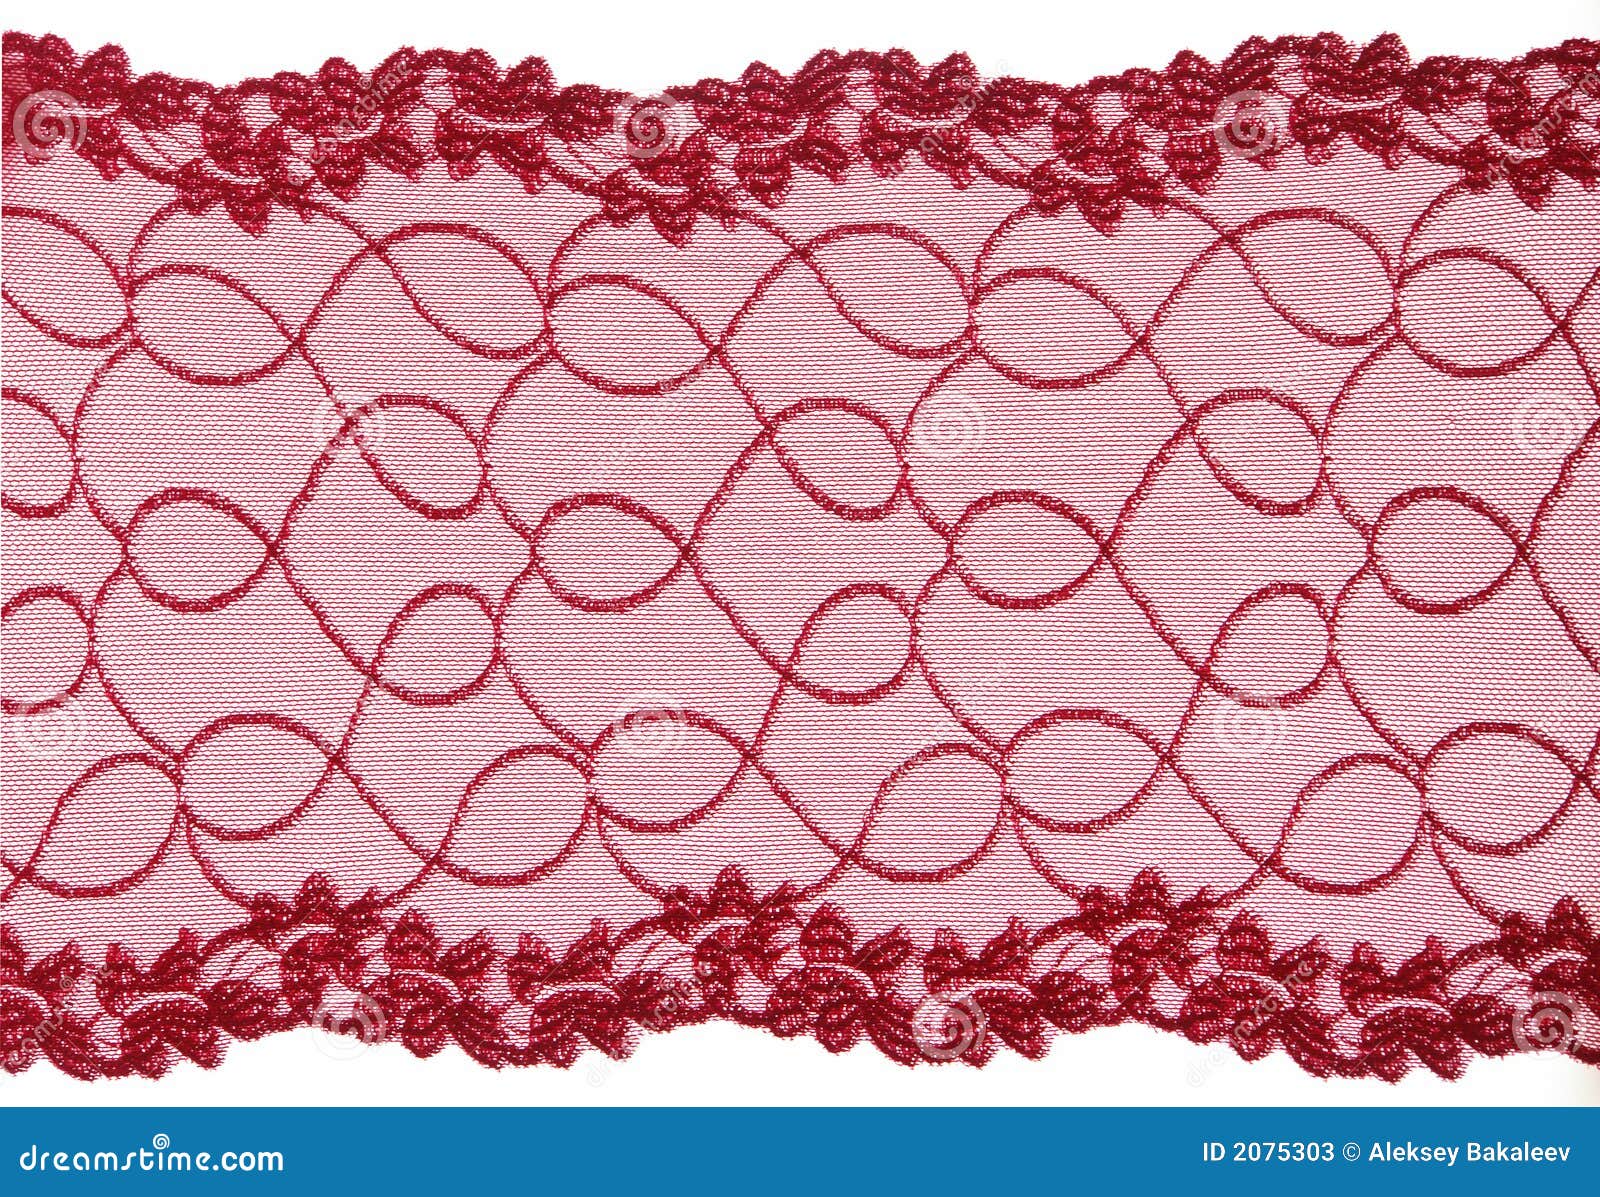 85,746 Red Lace Texture Images, Stock Photos, 3D objects, & Vectors